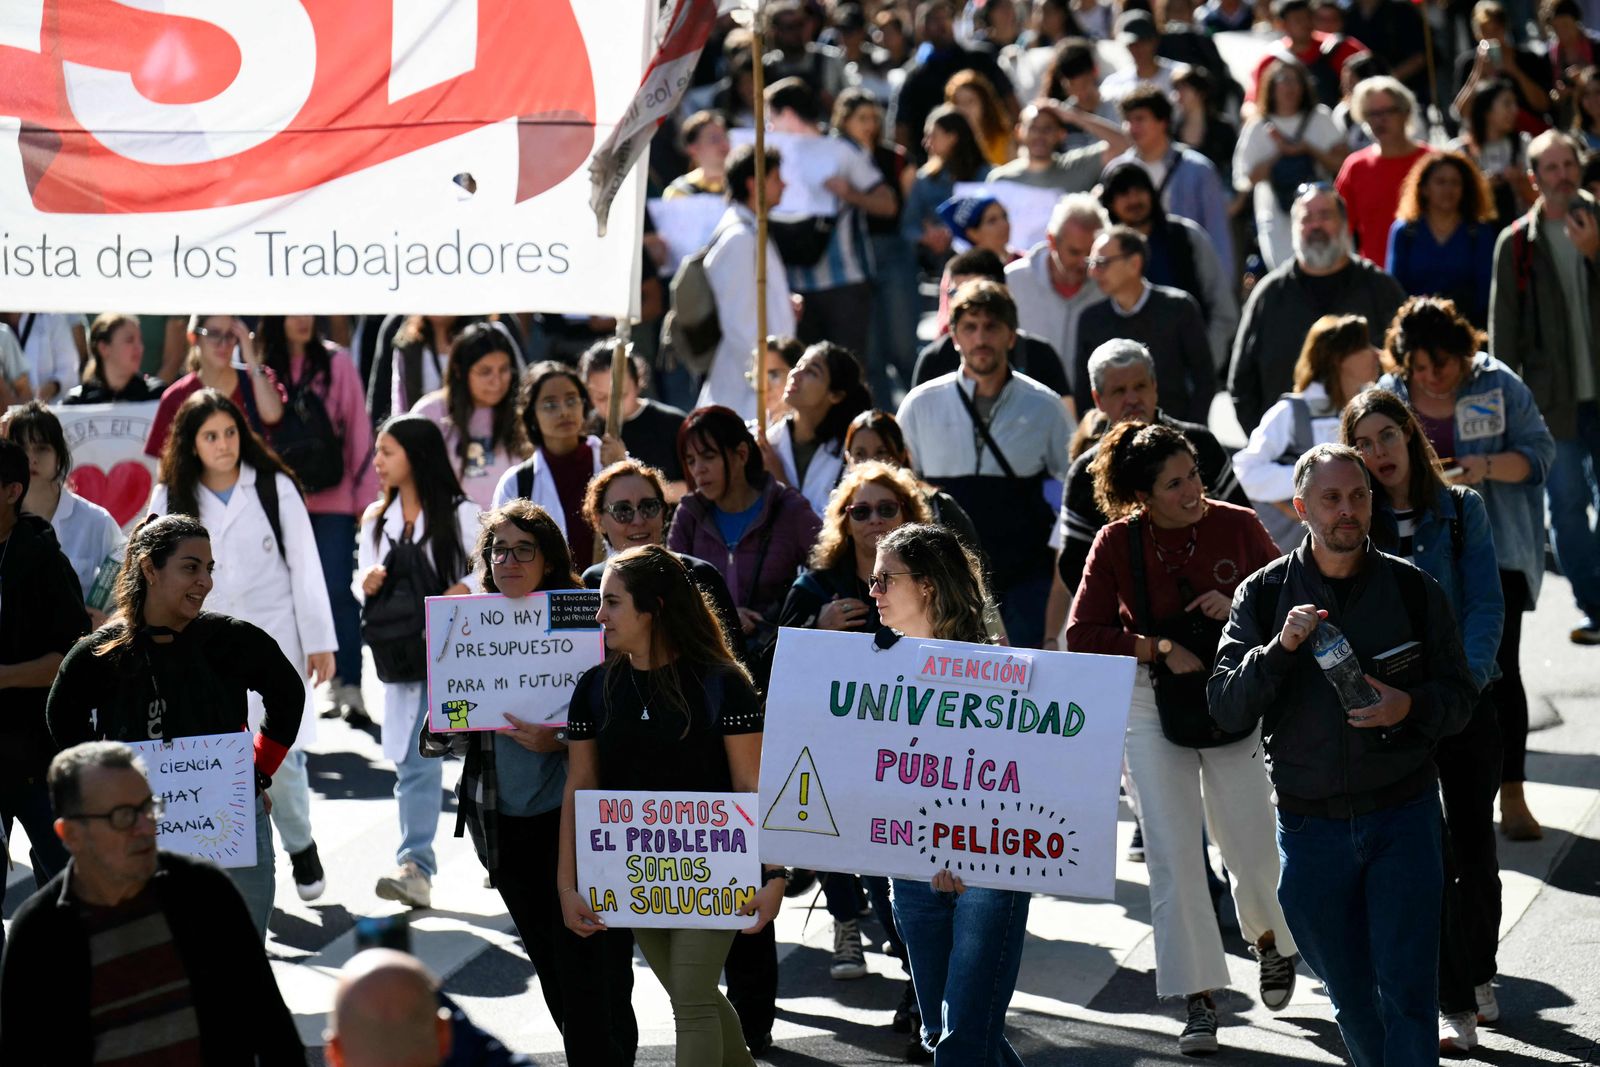 A demonstrator (R) holds a sign that reads 'Attention, public university in danger' during a march in protest of the budget adjustment to public universities in Buenos Aires on April 23, 2024. Thousands of university students took to the streets of Argentina on Tuesday to repudiate the defunding of the public university, which was declared in a state of budgetary emergency in the framework of the adjustment policy of the right-wing president Javier Milei. (Photo by Luis ROBAYO / AFP)